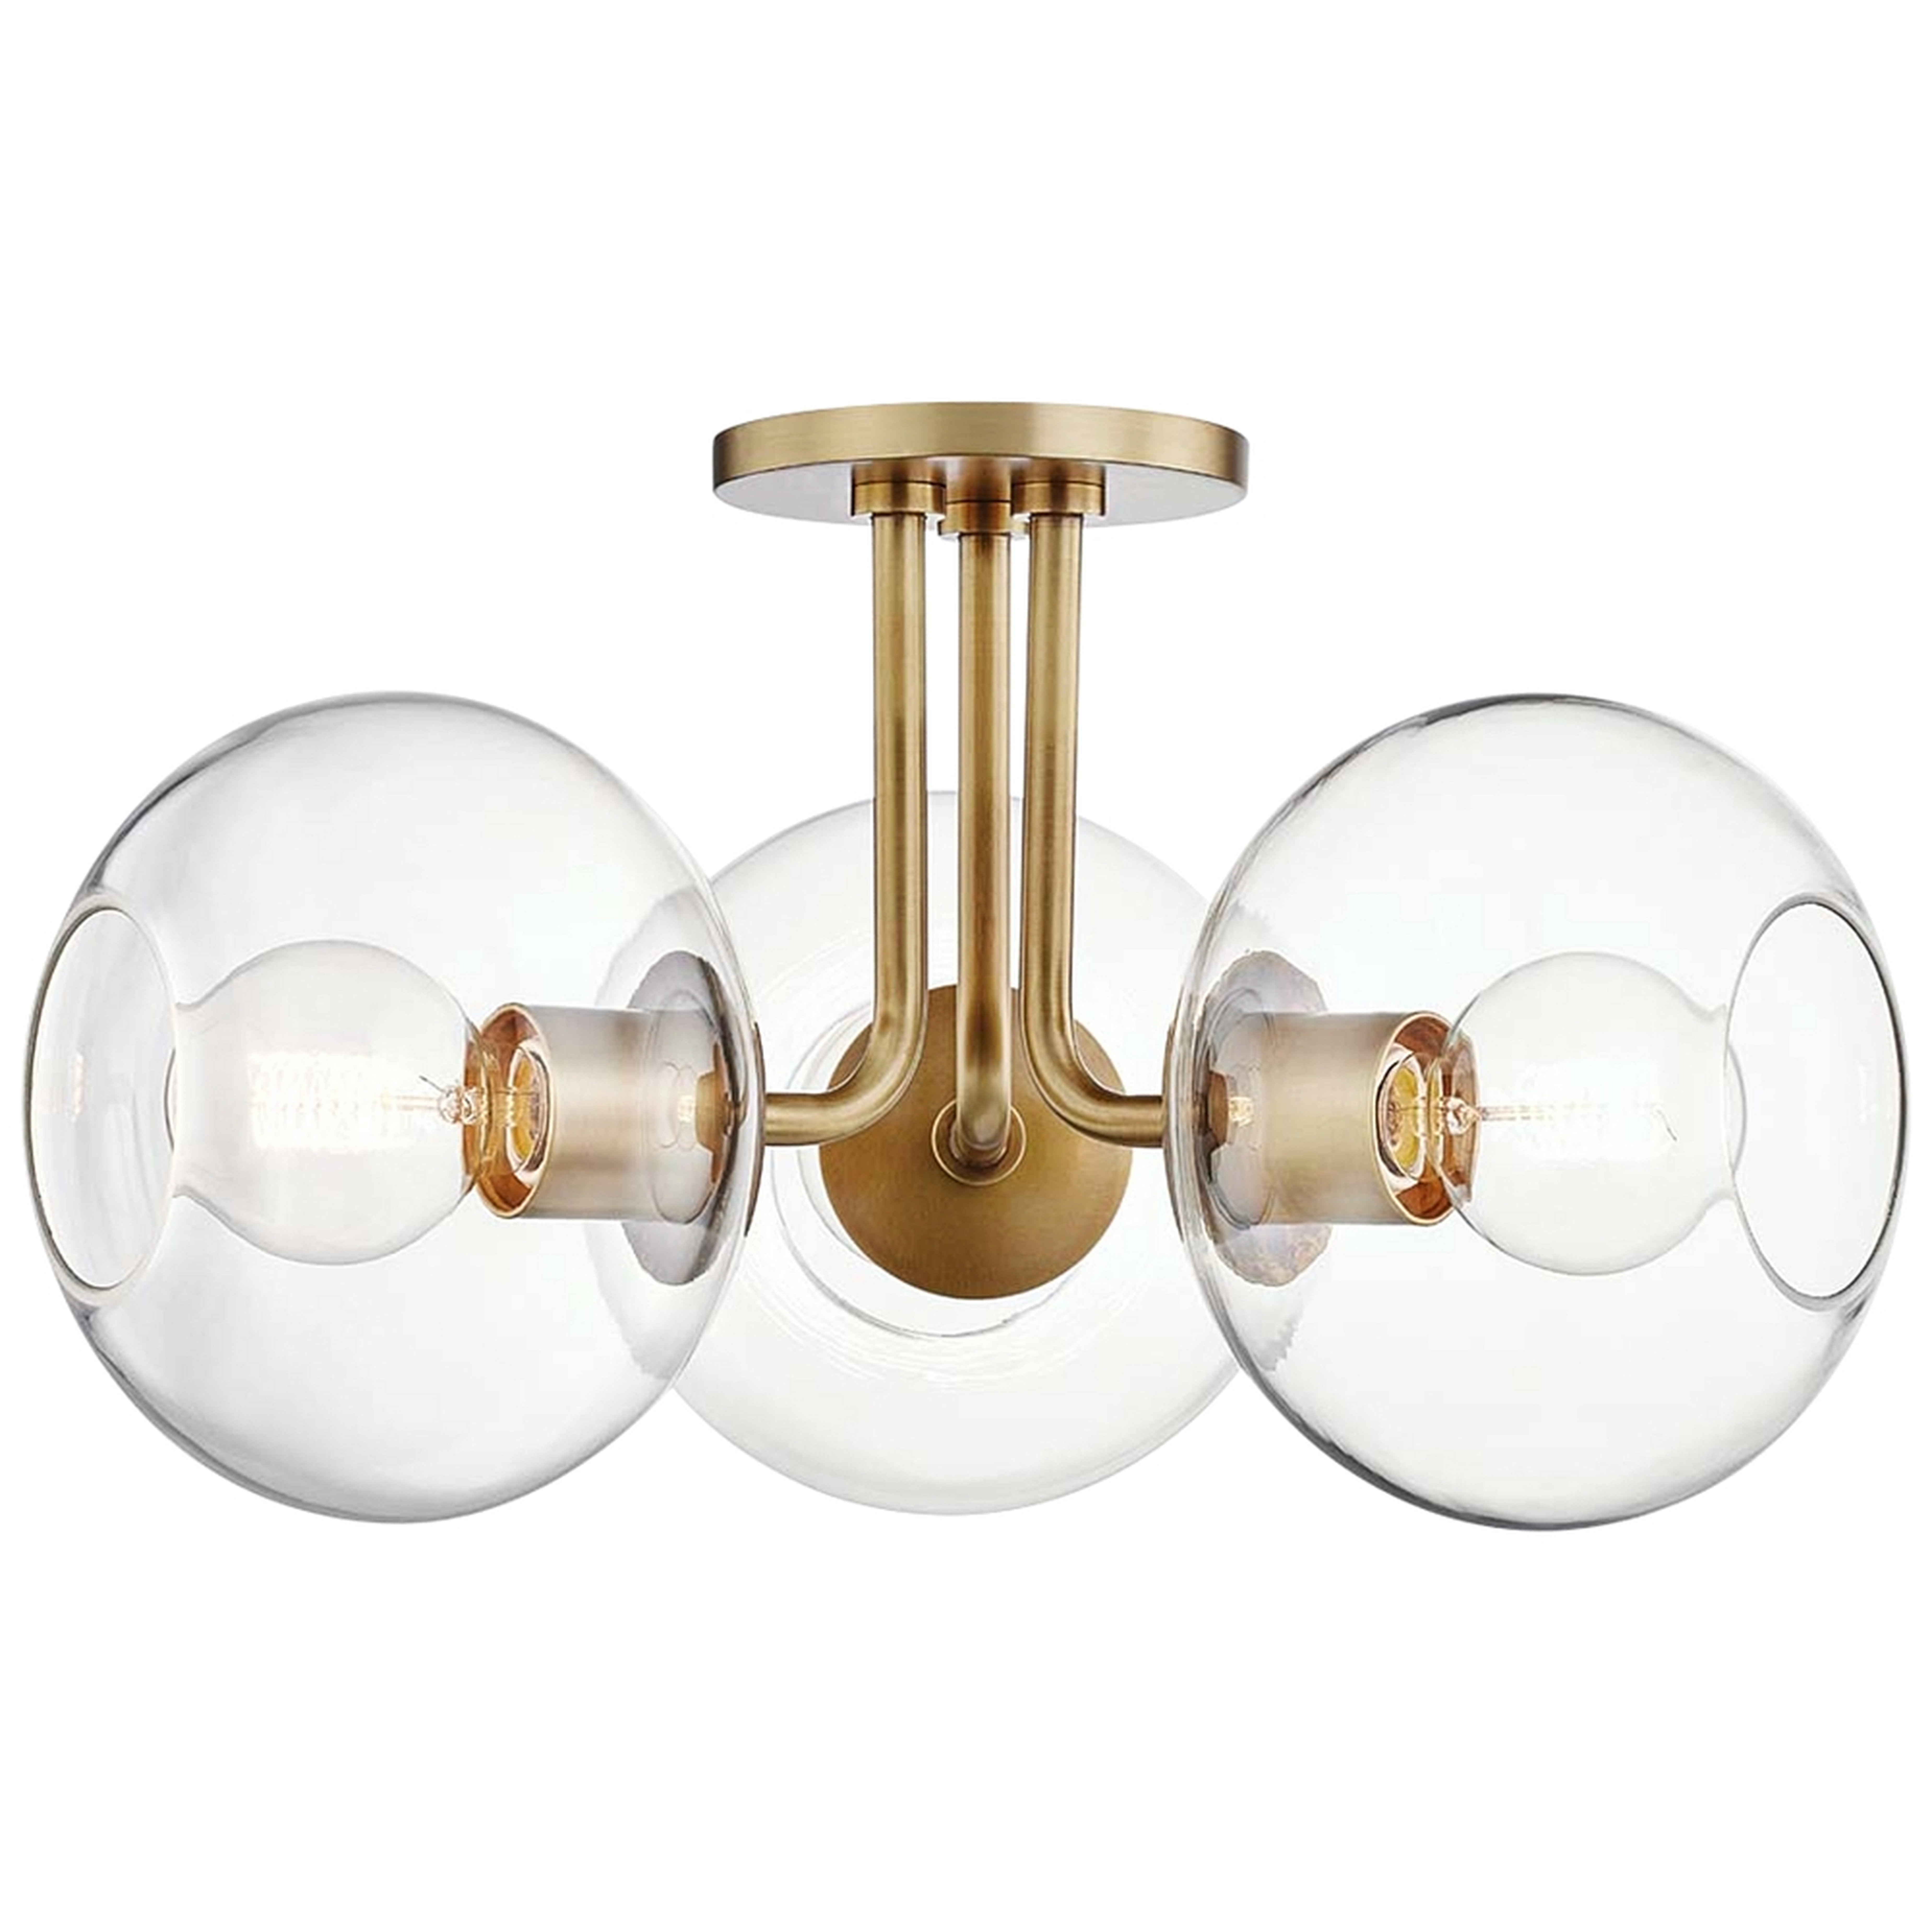 Mitzi Margot 20" Wide 3-Light Aged Brass Ceiling Light - Style # 71Y62 - Lamps Plus